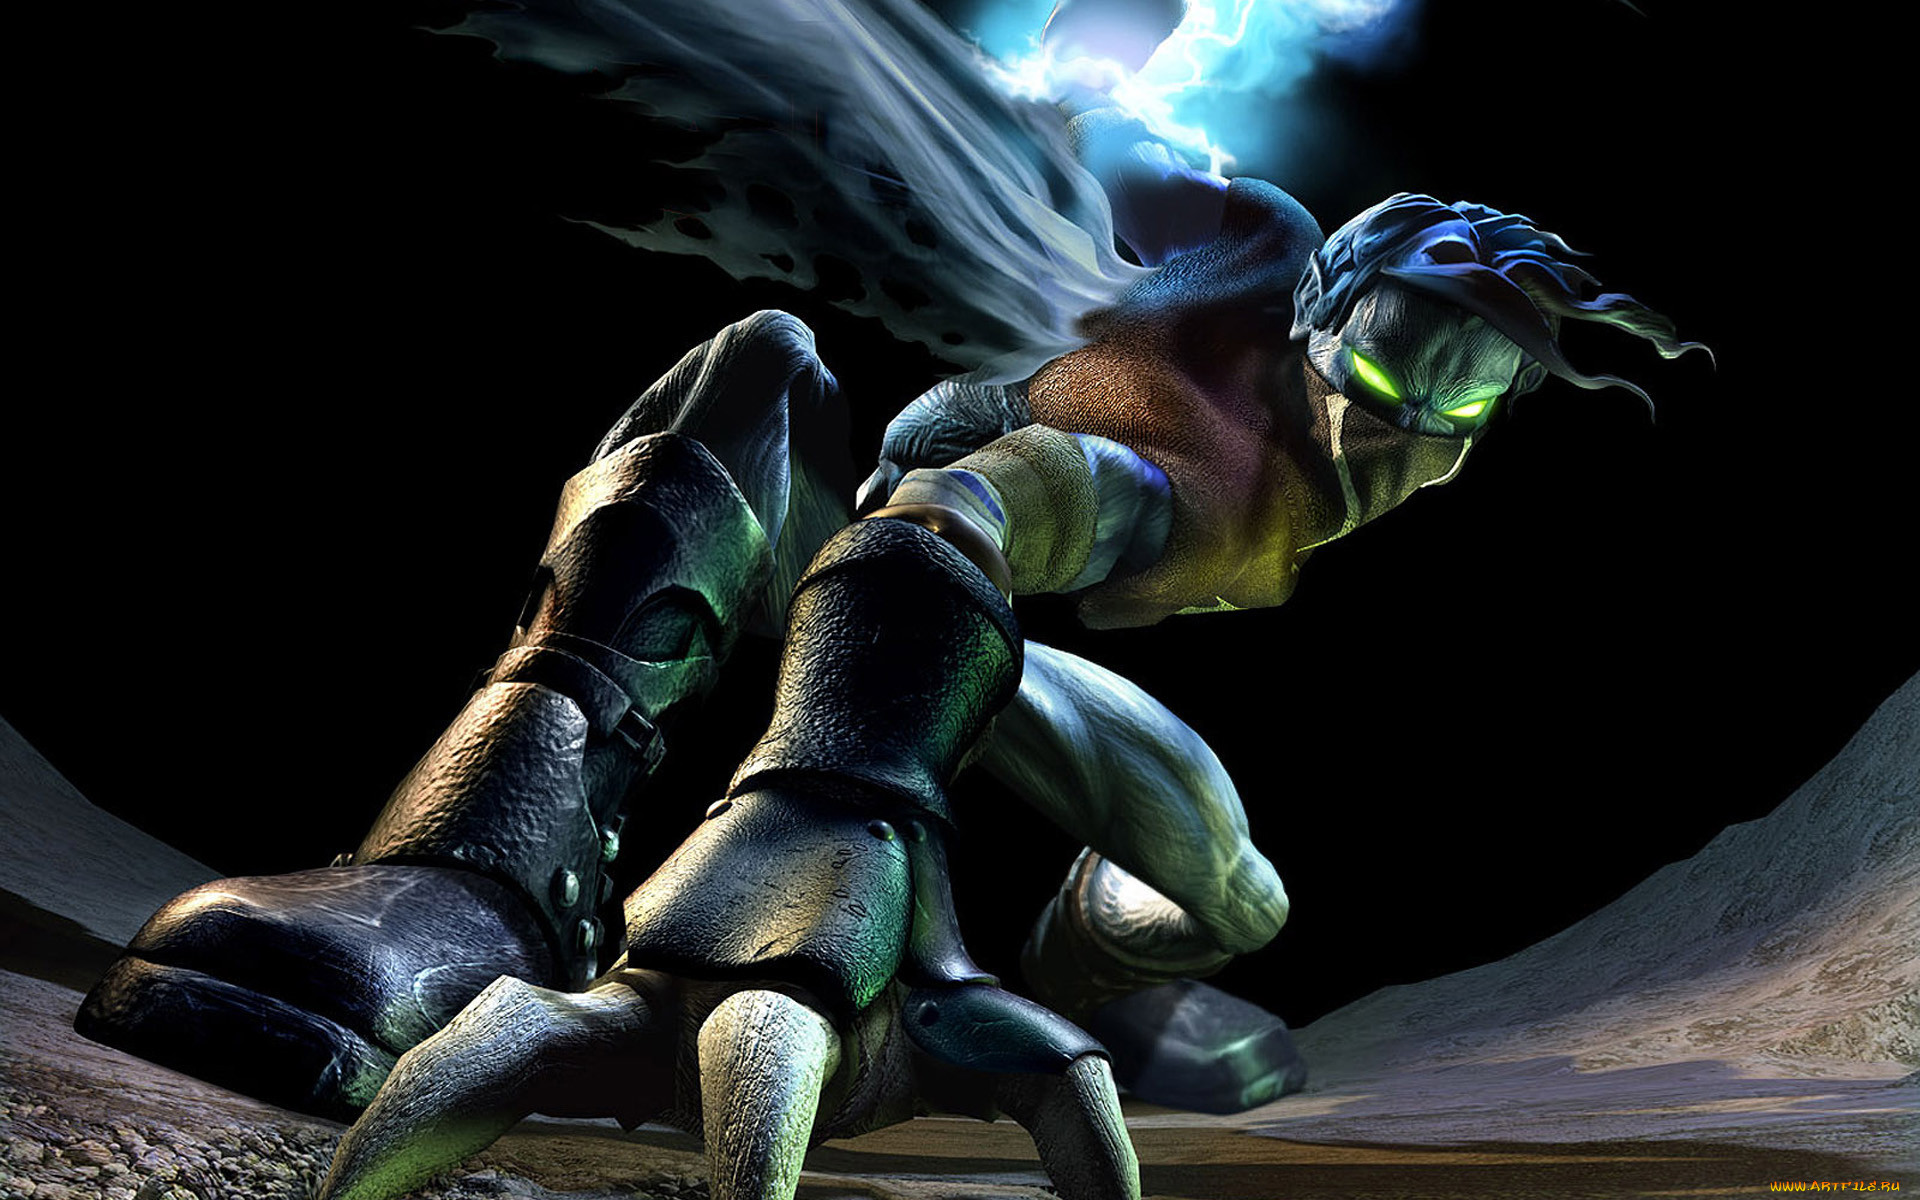  , legacy of kain,  defiance, , 